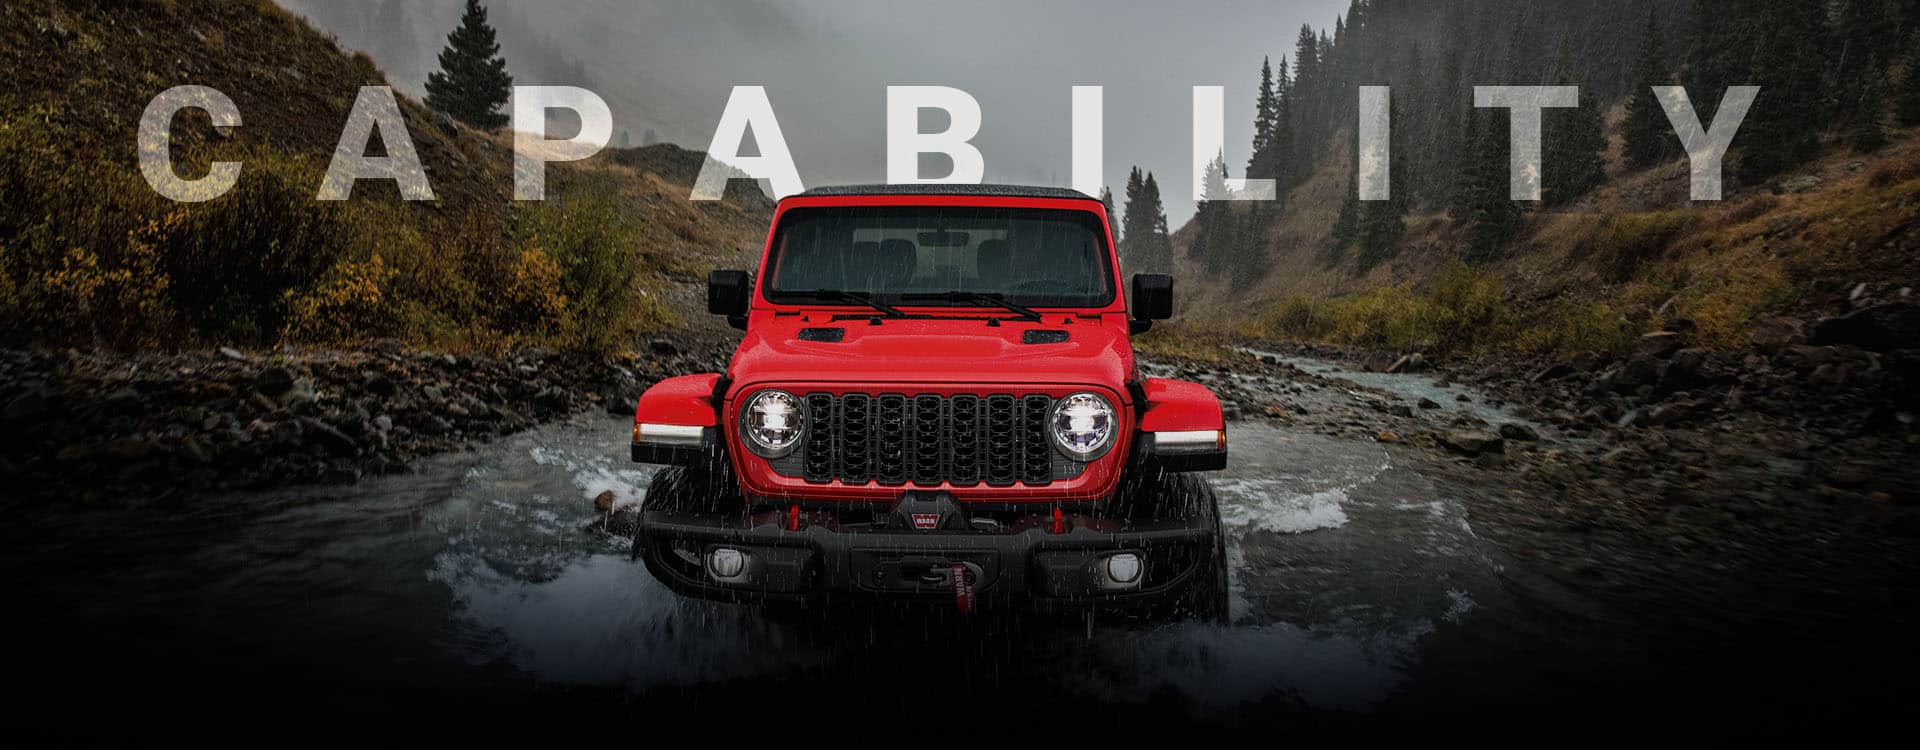 2024 Jeep® Wrangler 4x4 Capability OffRoad Excellence